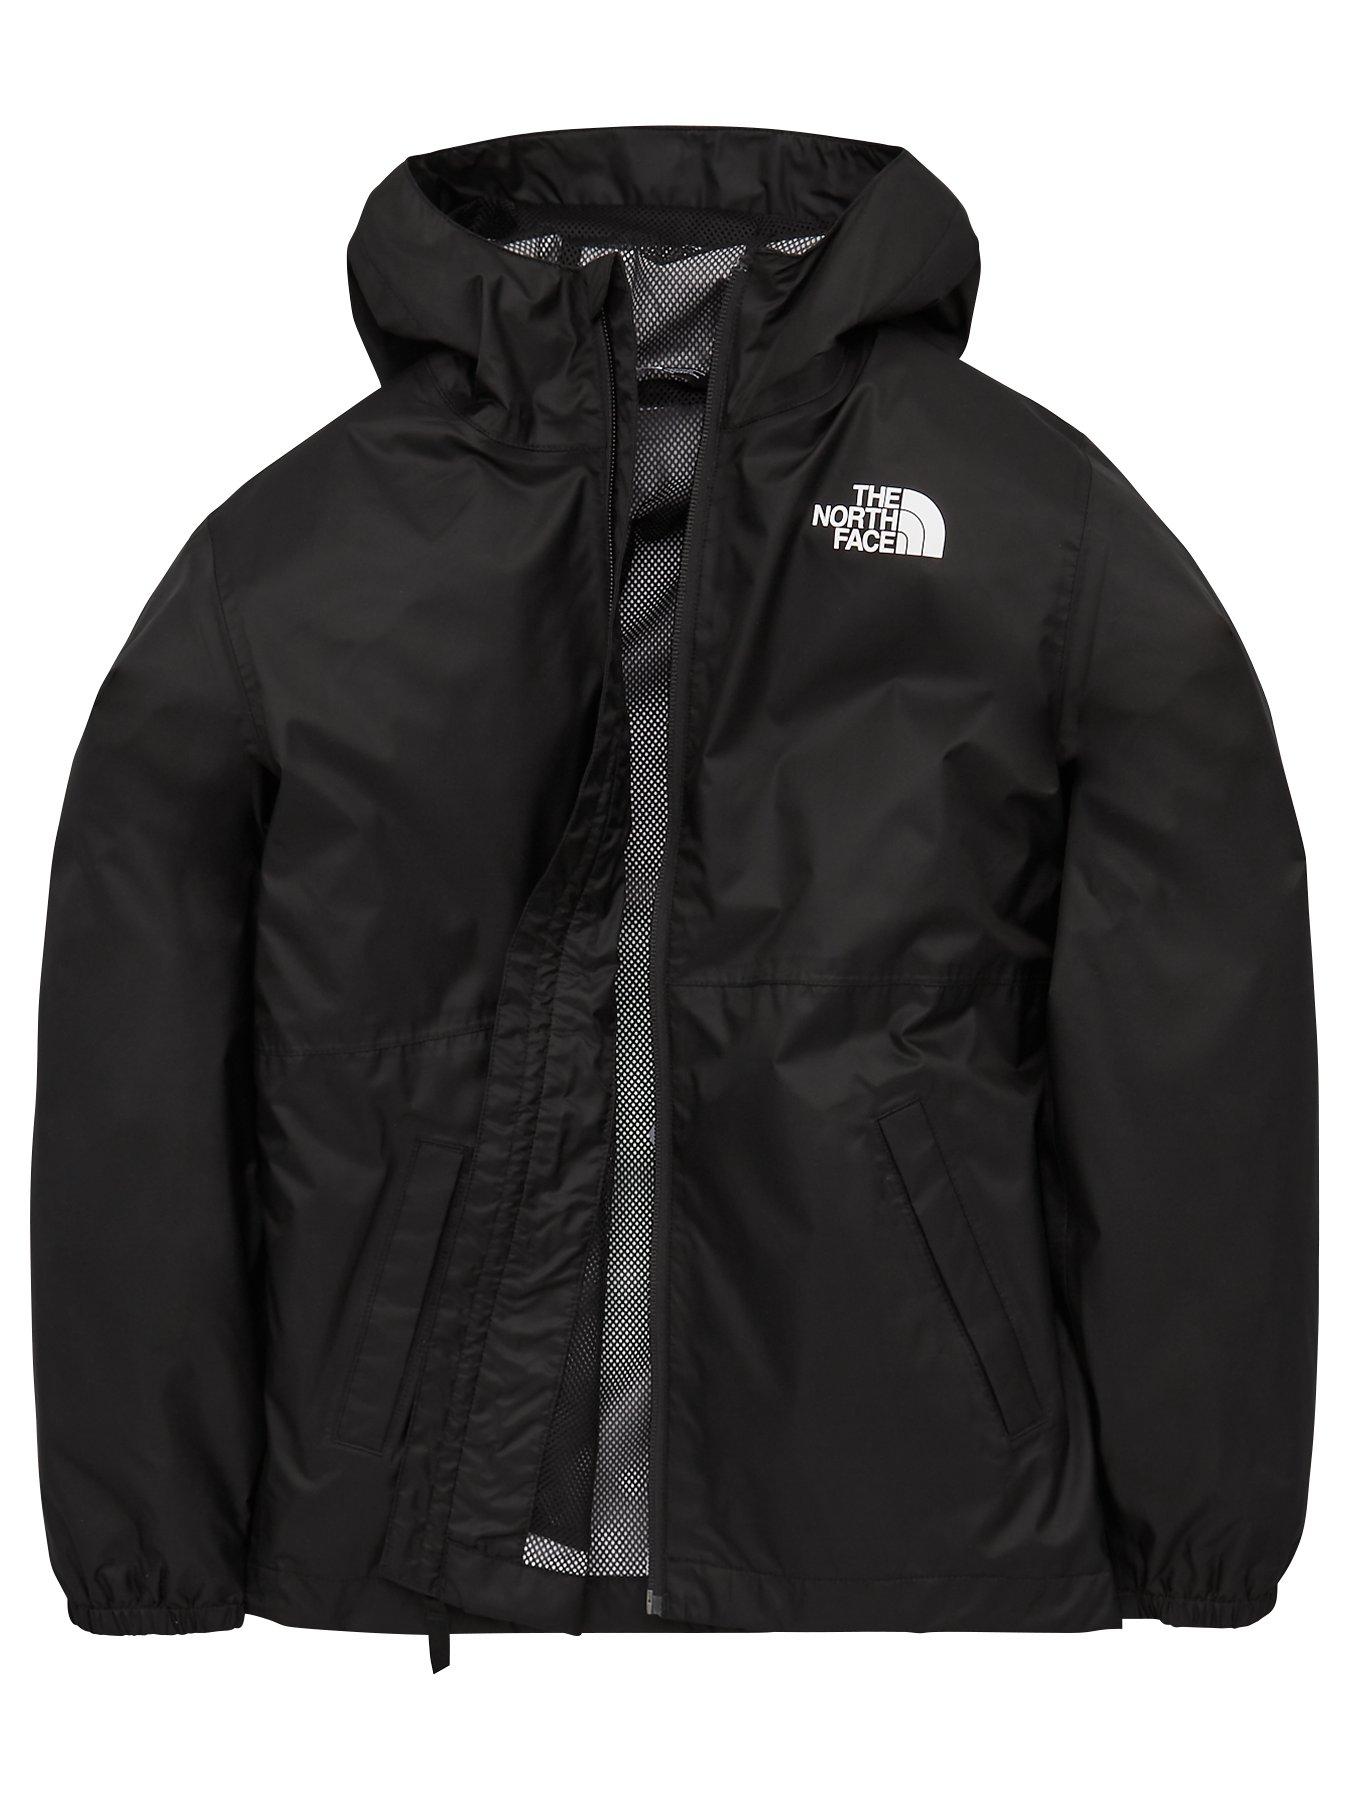 childrens north face sale